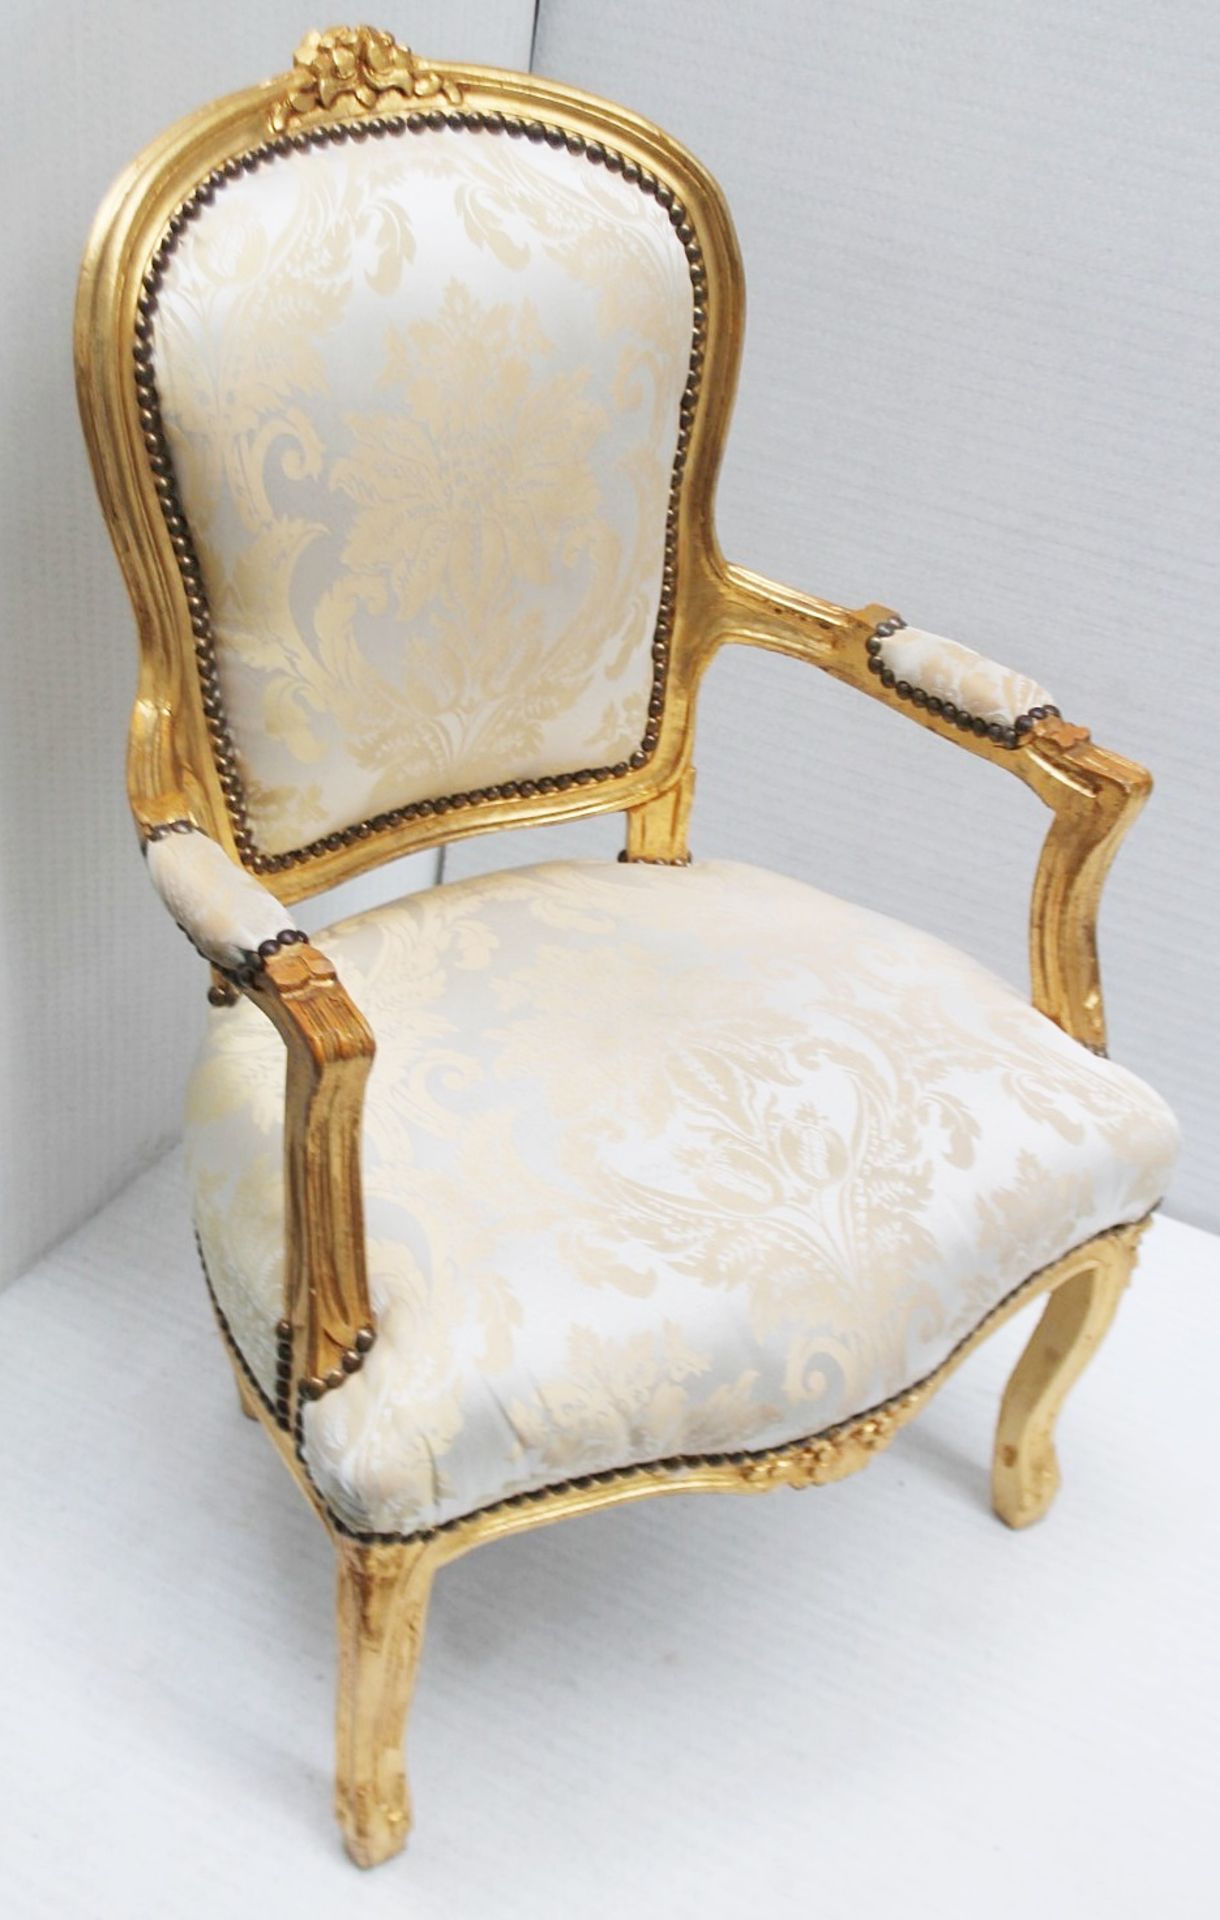 1 x Regency-Style Upholstered Chair In Gold & Silver With Ornate Carved Detailing - Recently Removed - Image 5 of 11